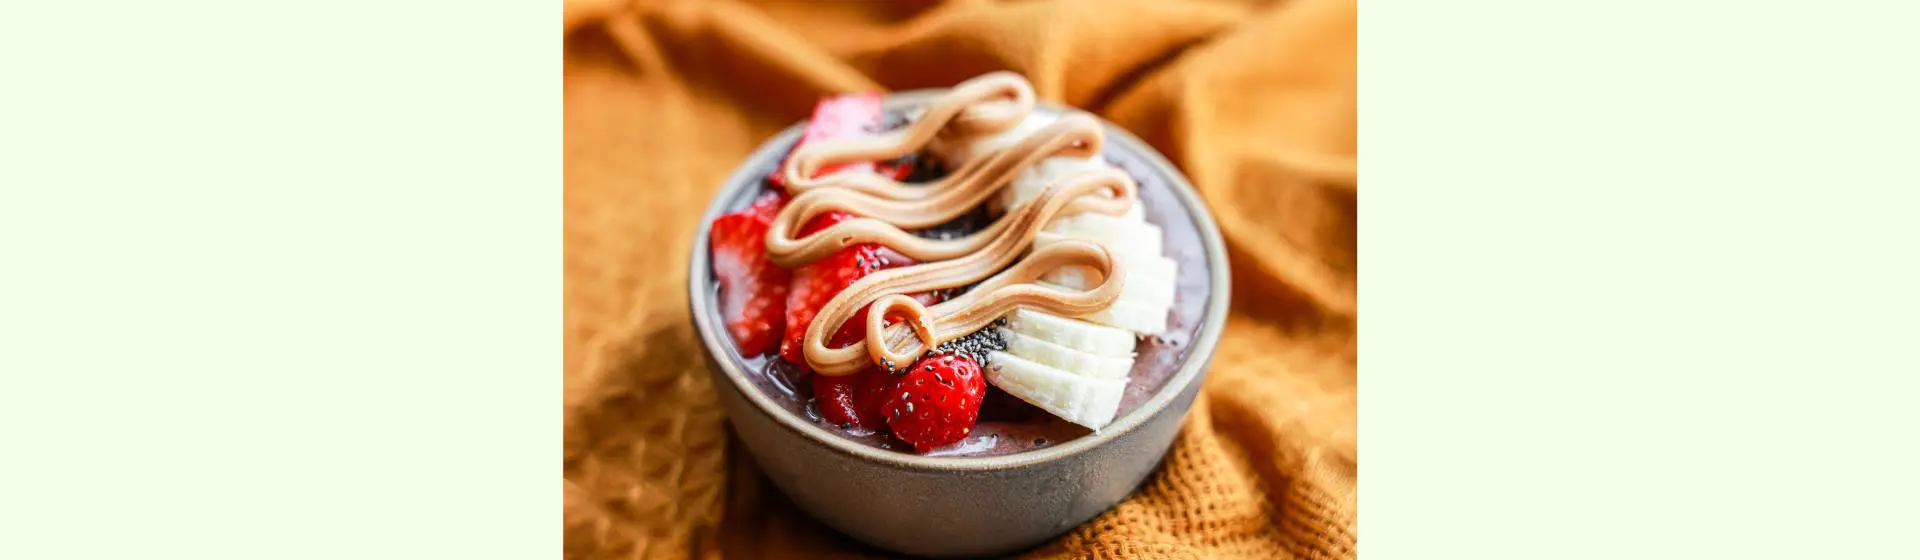 A bowl of food with strawberries and bananas.